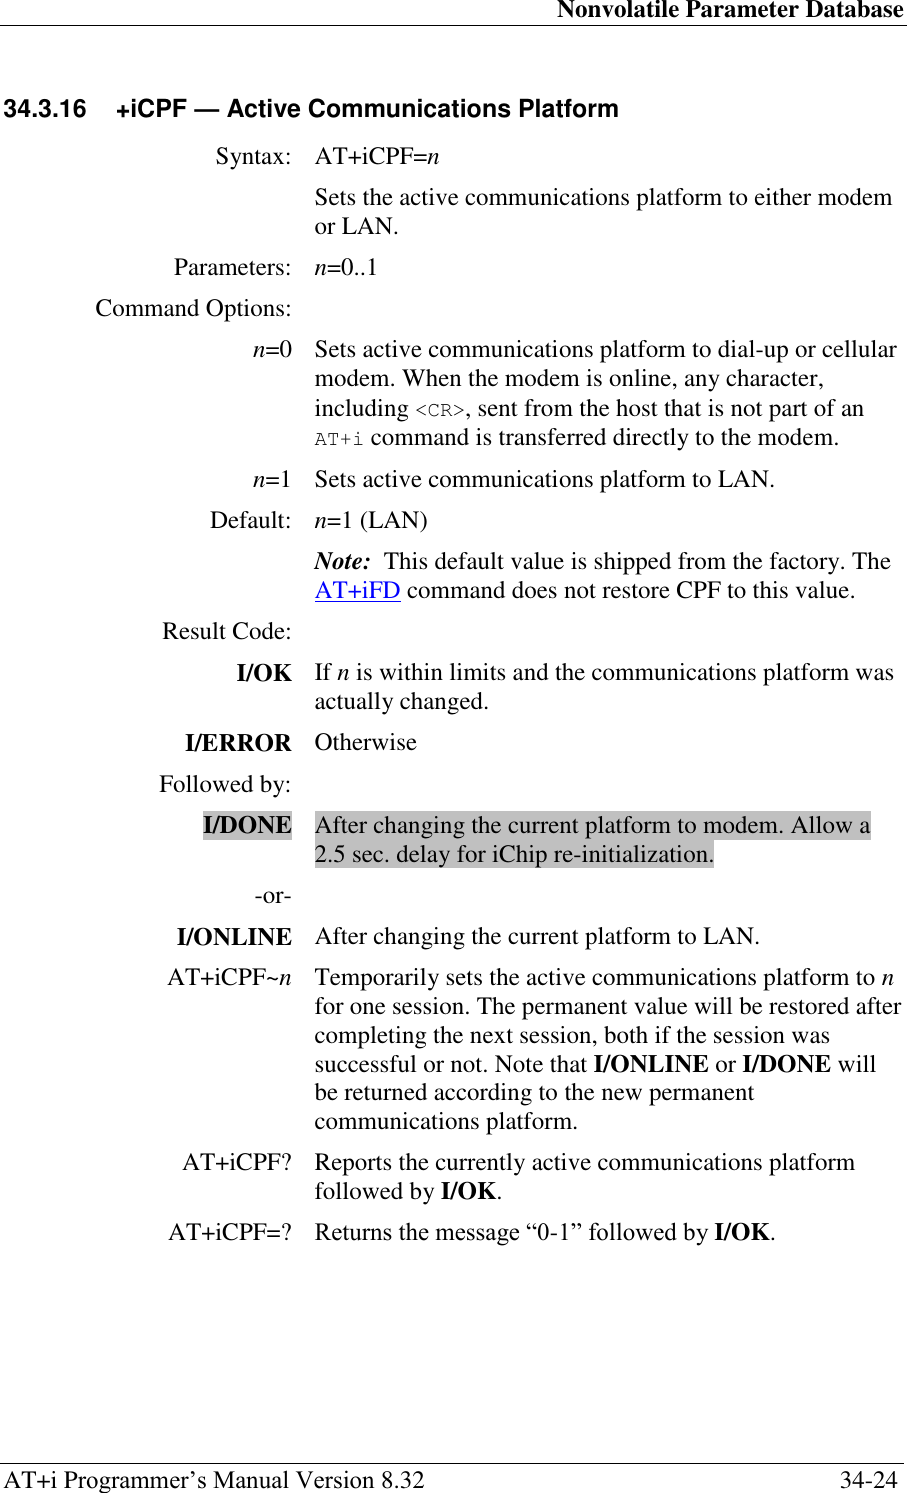 Nonvolatile Parameter Database AT+i Programmer‘s Manual Version 8.32  34-24 34.3.16  +iCPF — Active Communications Platform  Syntax: AT+iCPF=n  Sets the active communications platform to either modem or LAN. Parameters: n=0..1 Command Options:  n=0 Sets active communications platform to dial-up or cellular modem. When the modem is online, any character, including &lt;CR&gt;, sent from the host that is not part of an AT+i command is transferred directly to the modem. n=1 Sets active communications platform to LAN. Default: n=1 (LAN) Note:  This default value is shipped from the factory. The AT+iFD command does not restore CPF to this value. Result Code:  I/OK If n is within limits and the communications platform was actually changed. I/ERROR Otherwise Followed by:  I/DONE After changing the current platform to modem. Allow a 2.5 sec. delay for iChip re-initialization. -or-  I/ONLINE After changing the current platform to LAN. AT+iCPF~n Temporarily sets the active communications platform to n for one session. The permanent value will be restored after completing the next session, both if the session was successful or not. Note that I/ONLINE or I/DONE will be returned according to the new permanent communications platform. AT+iCPF? Reports the currently active communications platform followed by I/OK. AT+iCPF=? Returns the message ―0-1‖ followed by I/OK.   